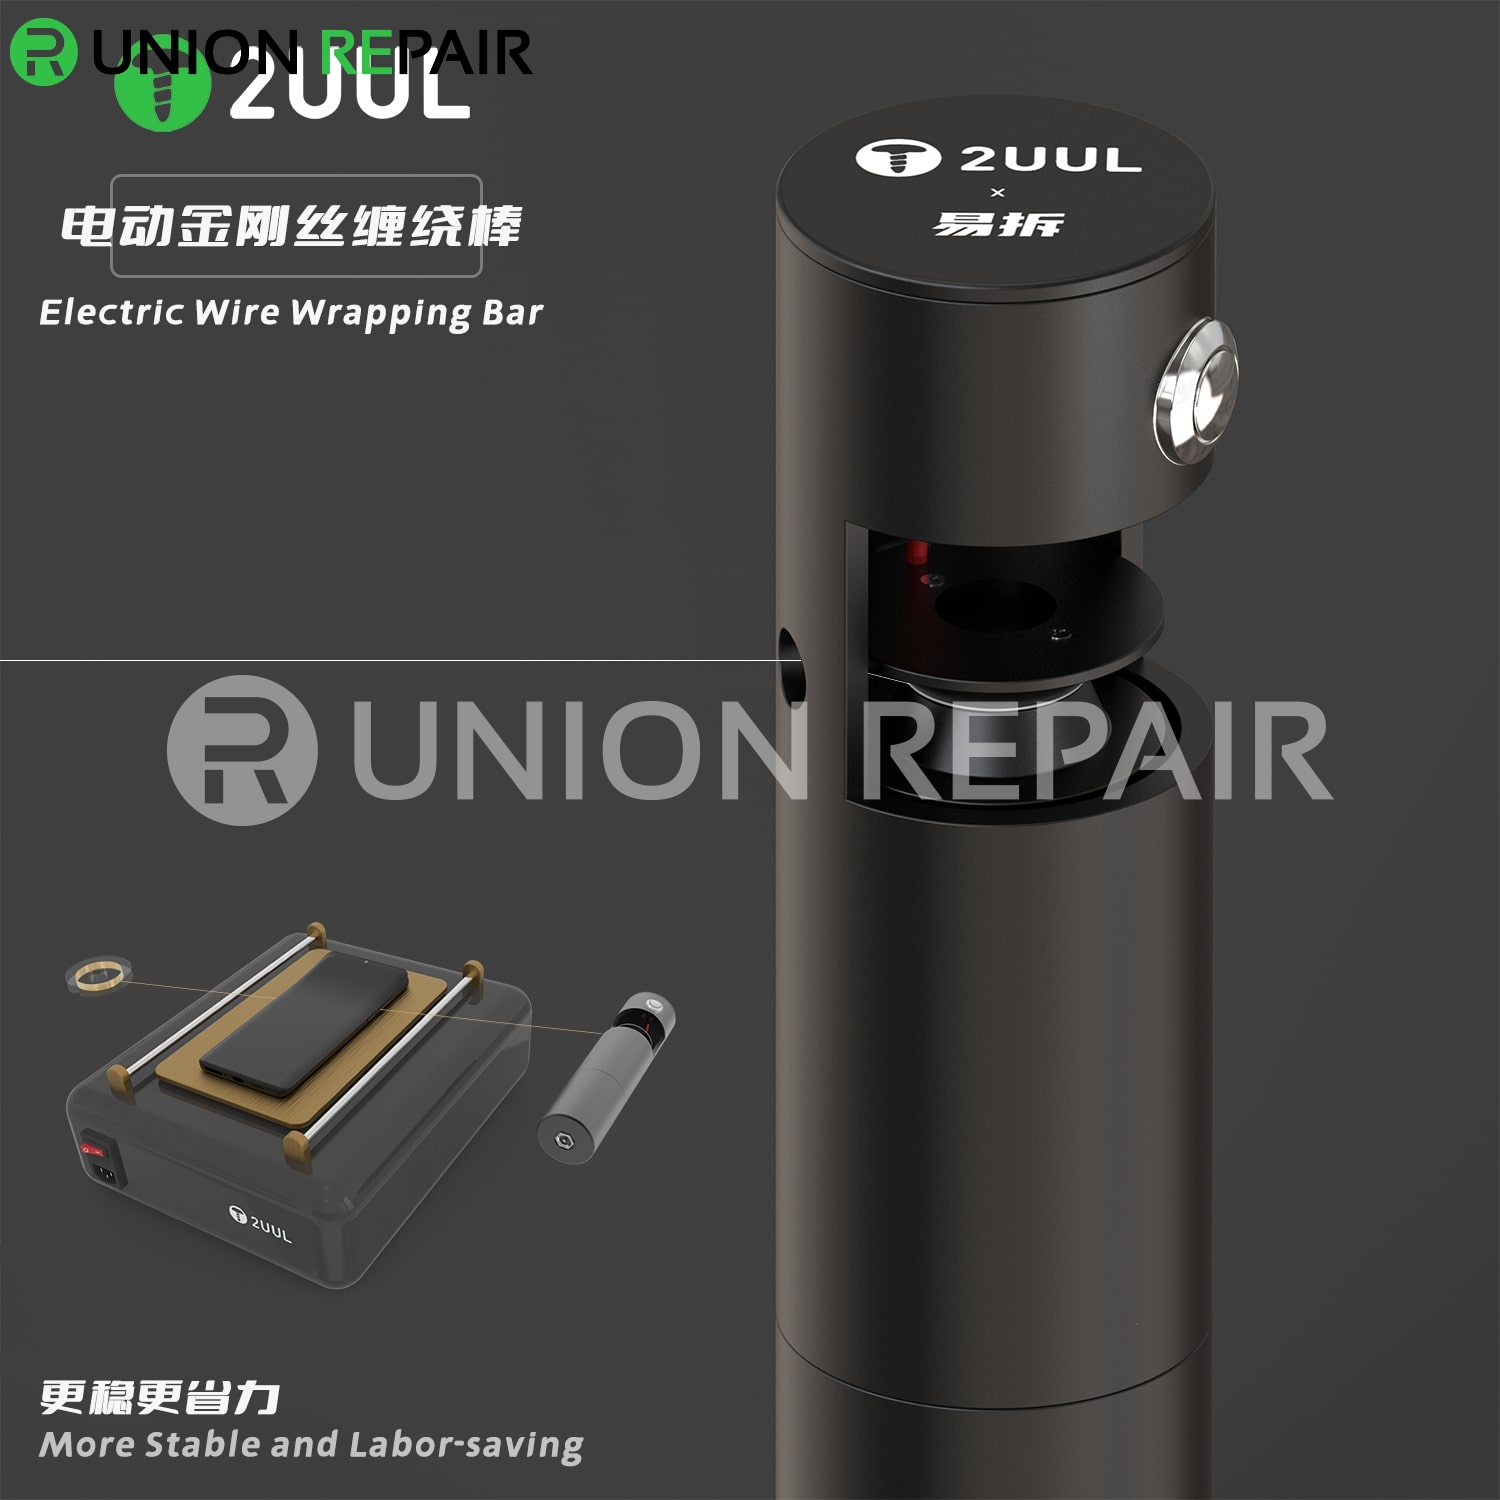 2UUL Electric Wire Wrapping Bar